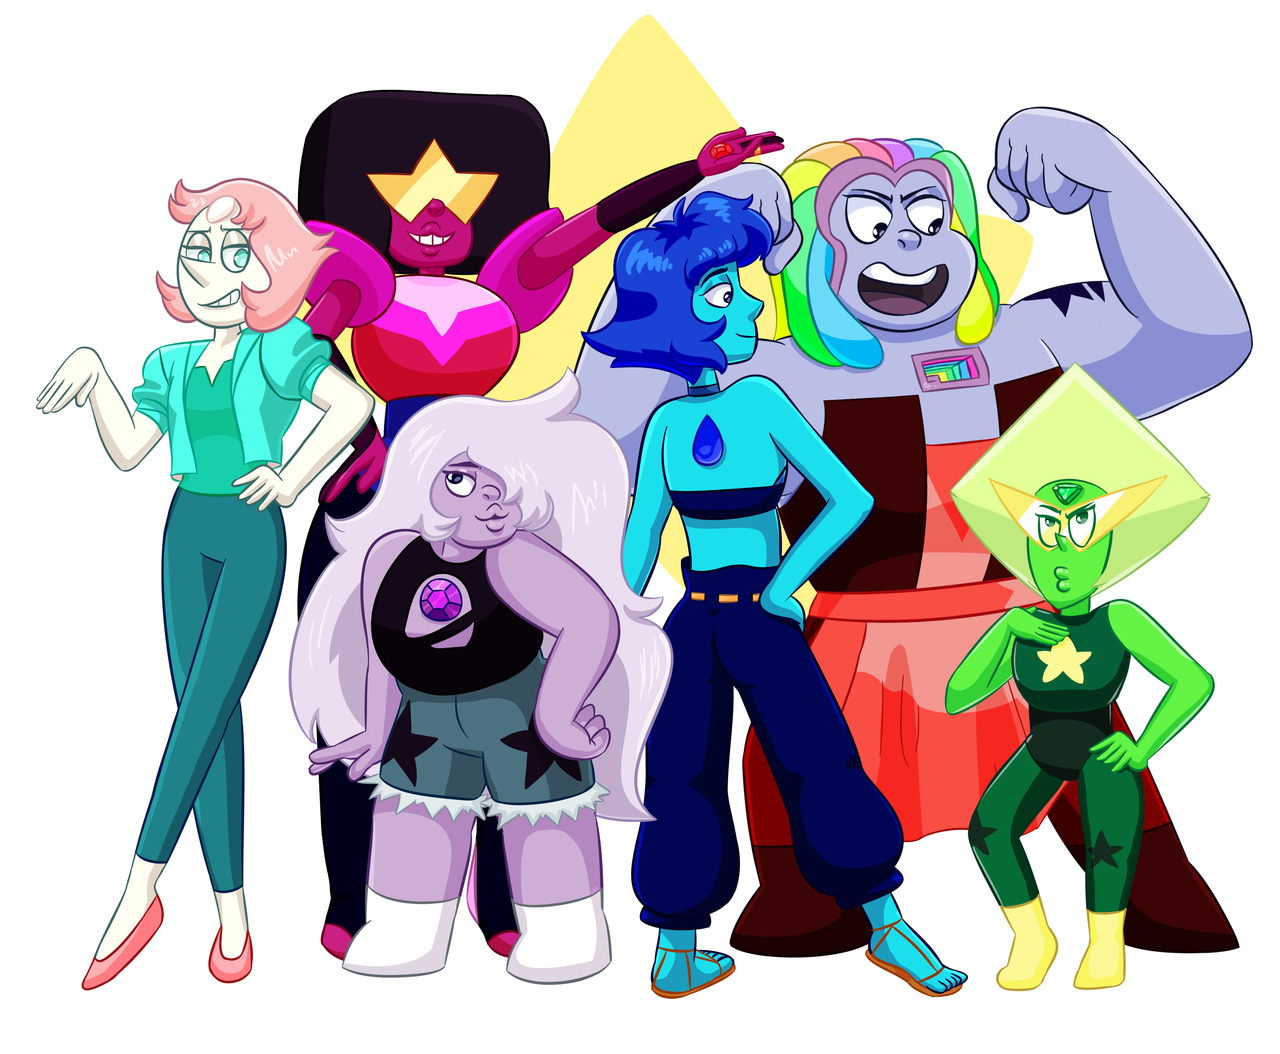 The Crystylish Gems
My puns just keep on getting worse 🙈... I just love their new outfits!! But Pearl's and Lapis's are my favs... they have changed the most! That's why I like them the most....